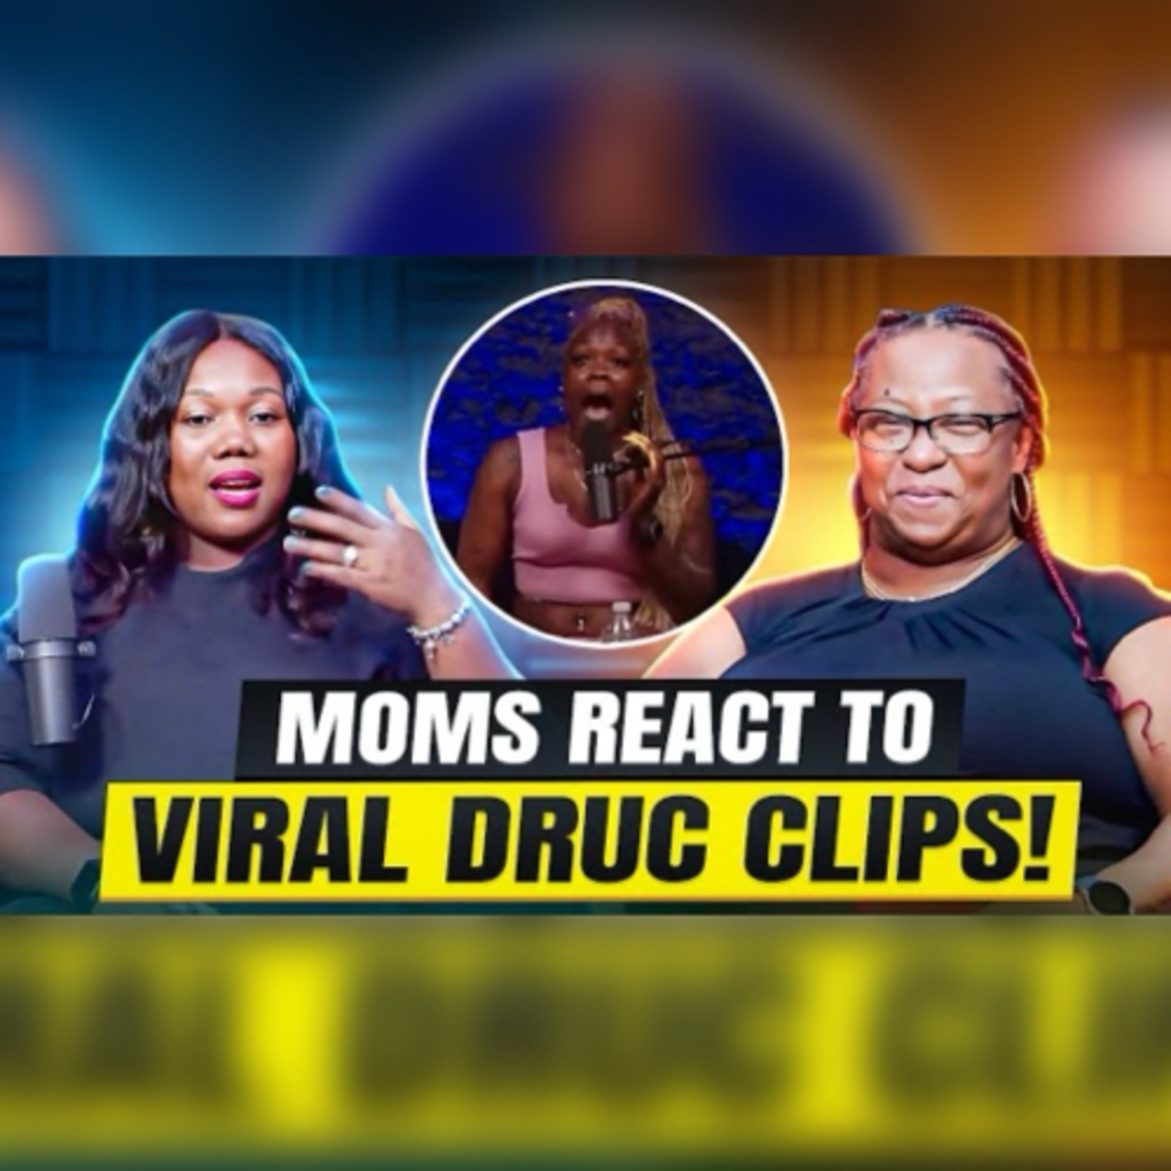 Black Podcasting - Dailyrapupcrew's Moms React to Viral DRUC Clips!